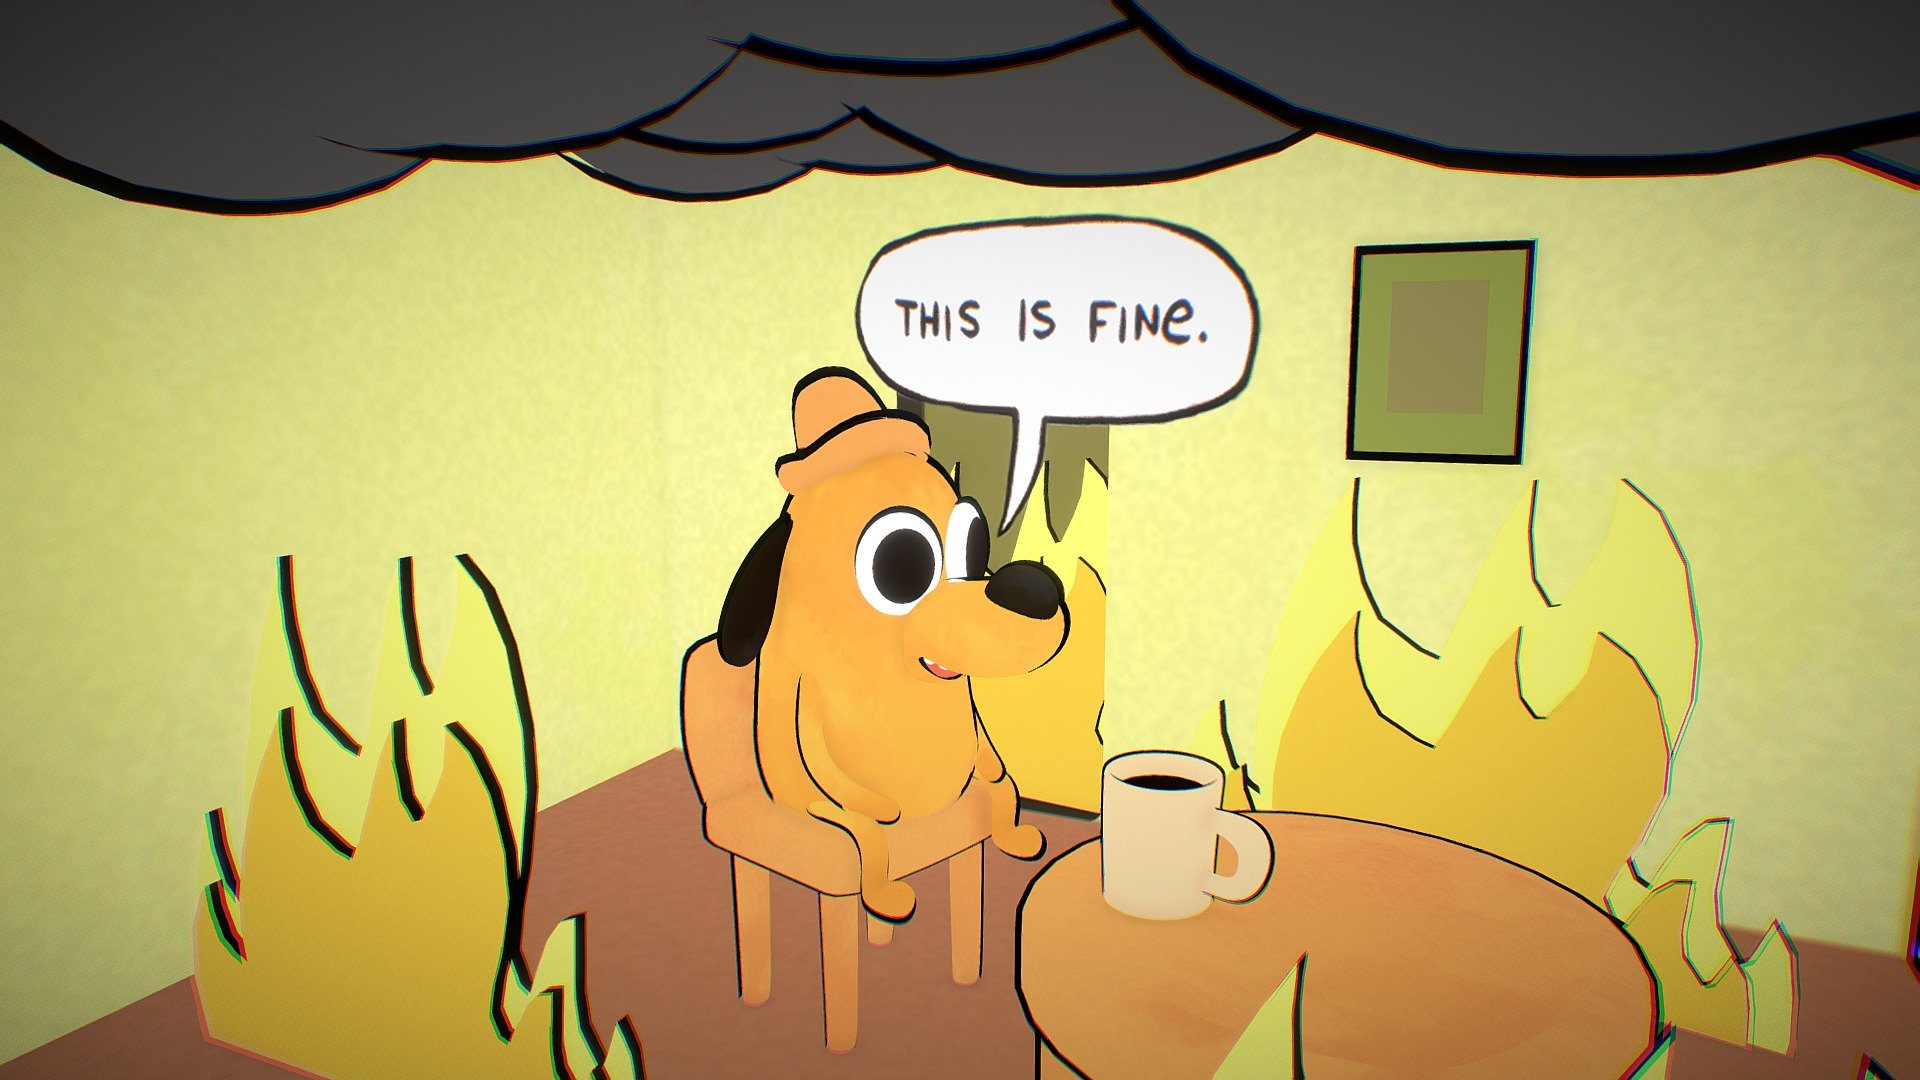 Meme Challenge: This Is Fine - 3D model by Slo-mo Witch (@SloMoWitch) .